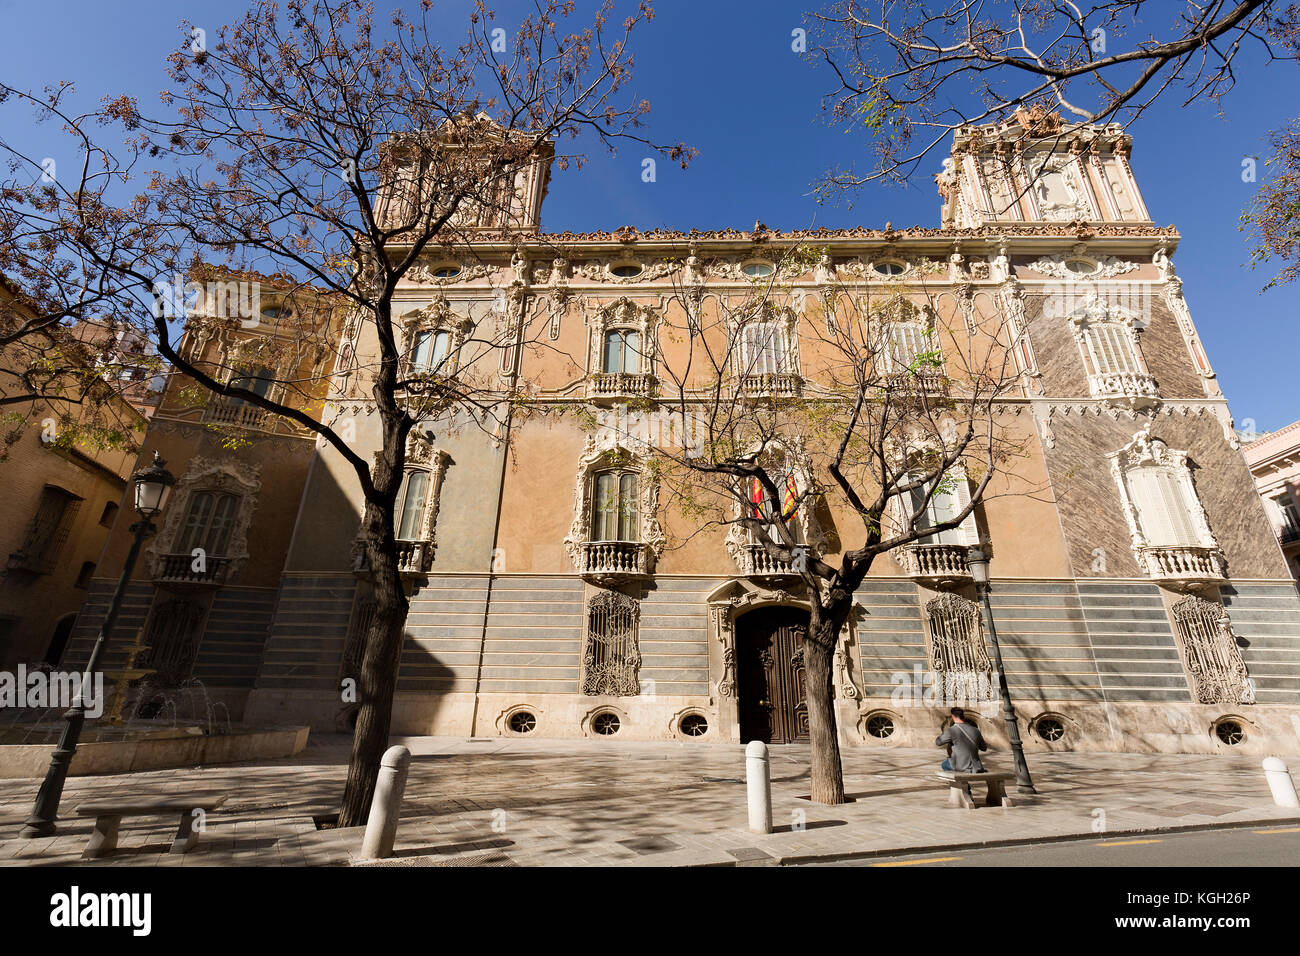 Valencia, Spain. October 25, 2017: The National Museum of Ceramics and Sumptuary Arts González Martí is located in the palace of the Marqués de Dos Ag Stock Photo